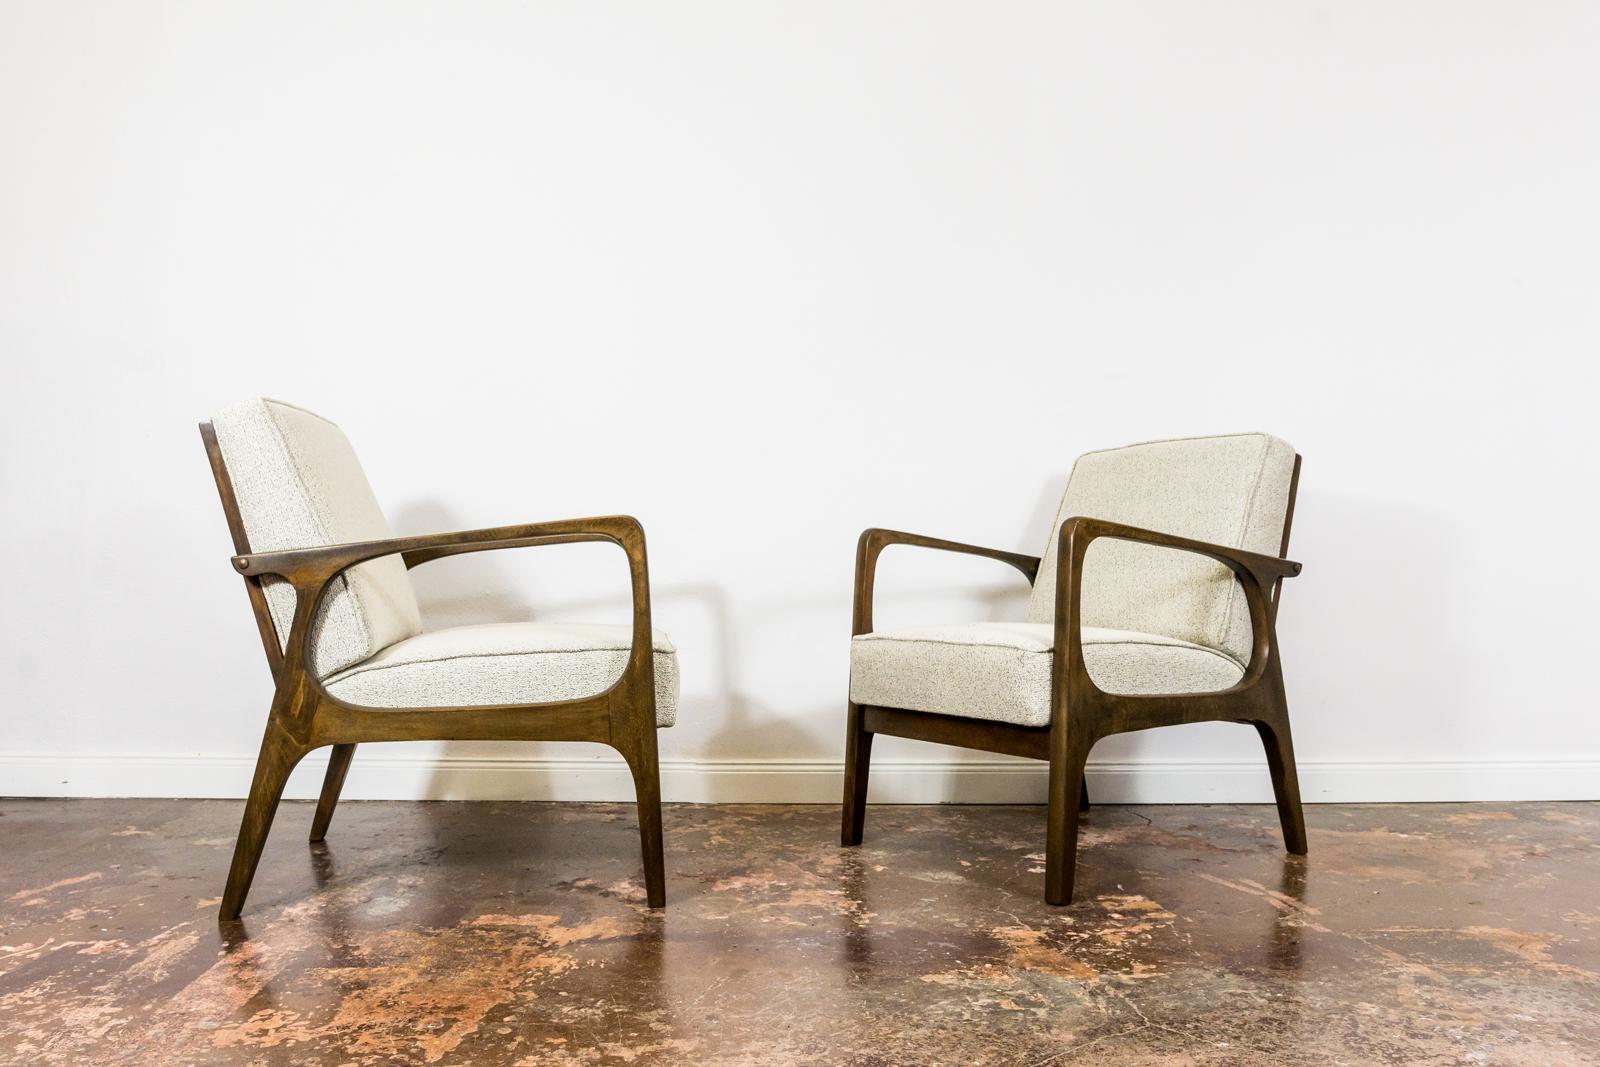 Polish Pair of Mid-Century Armchairs from Prudnickie Fabryki Mebli 1960's, Poland For Sale